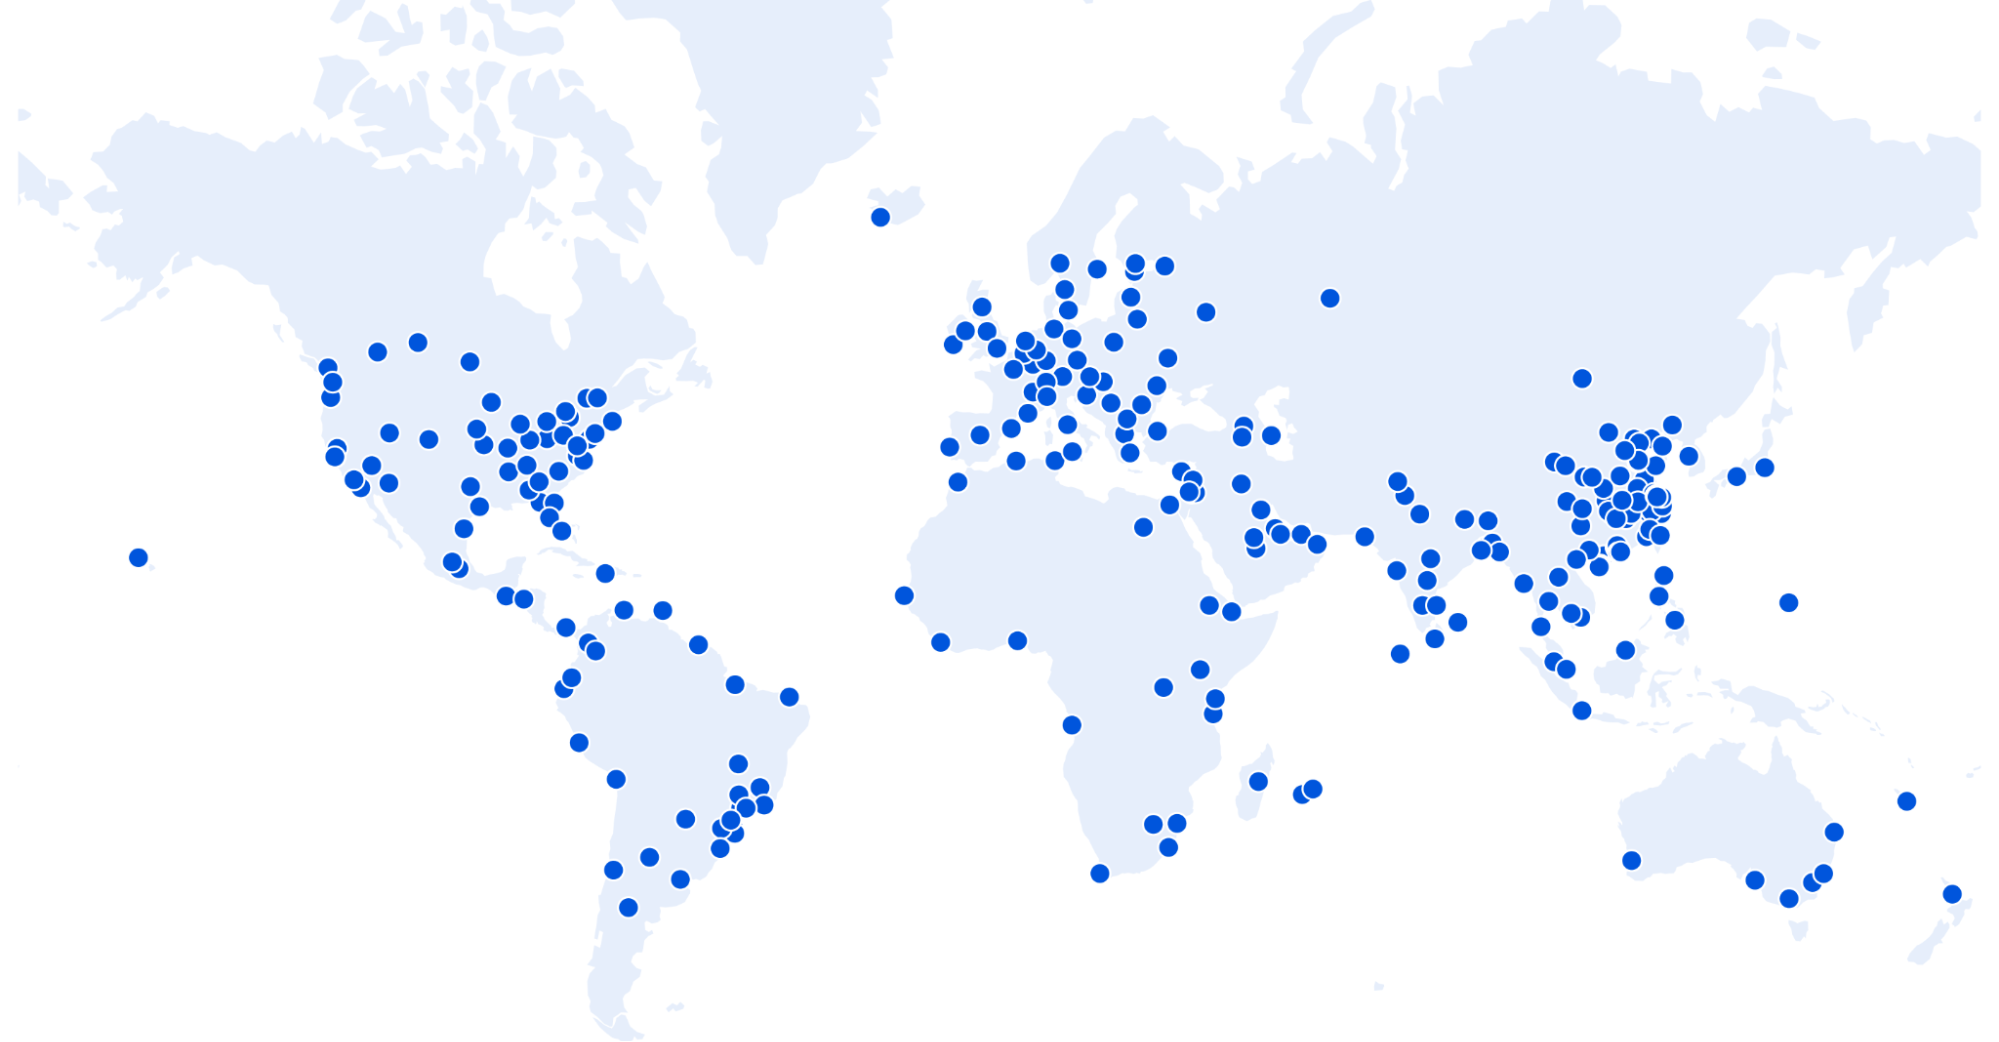 A map of the world highlighting all 250+ cities in which Cloudflare is deployed.